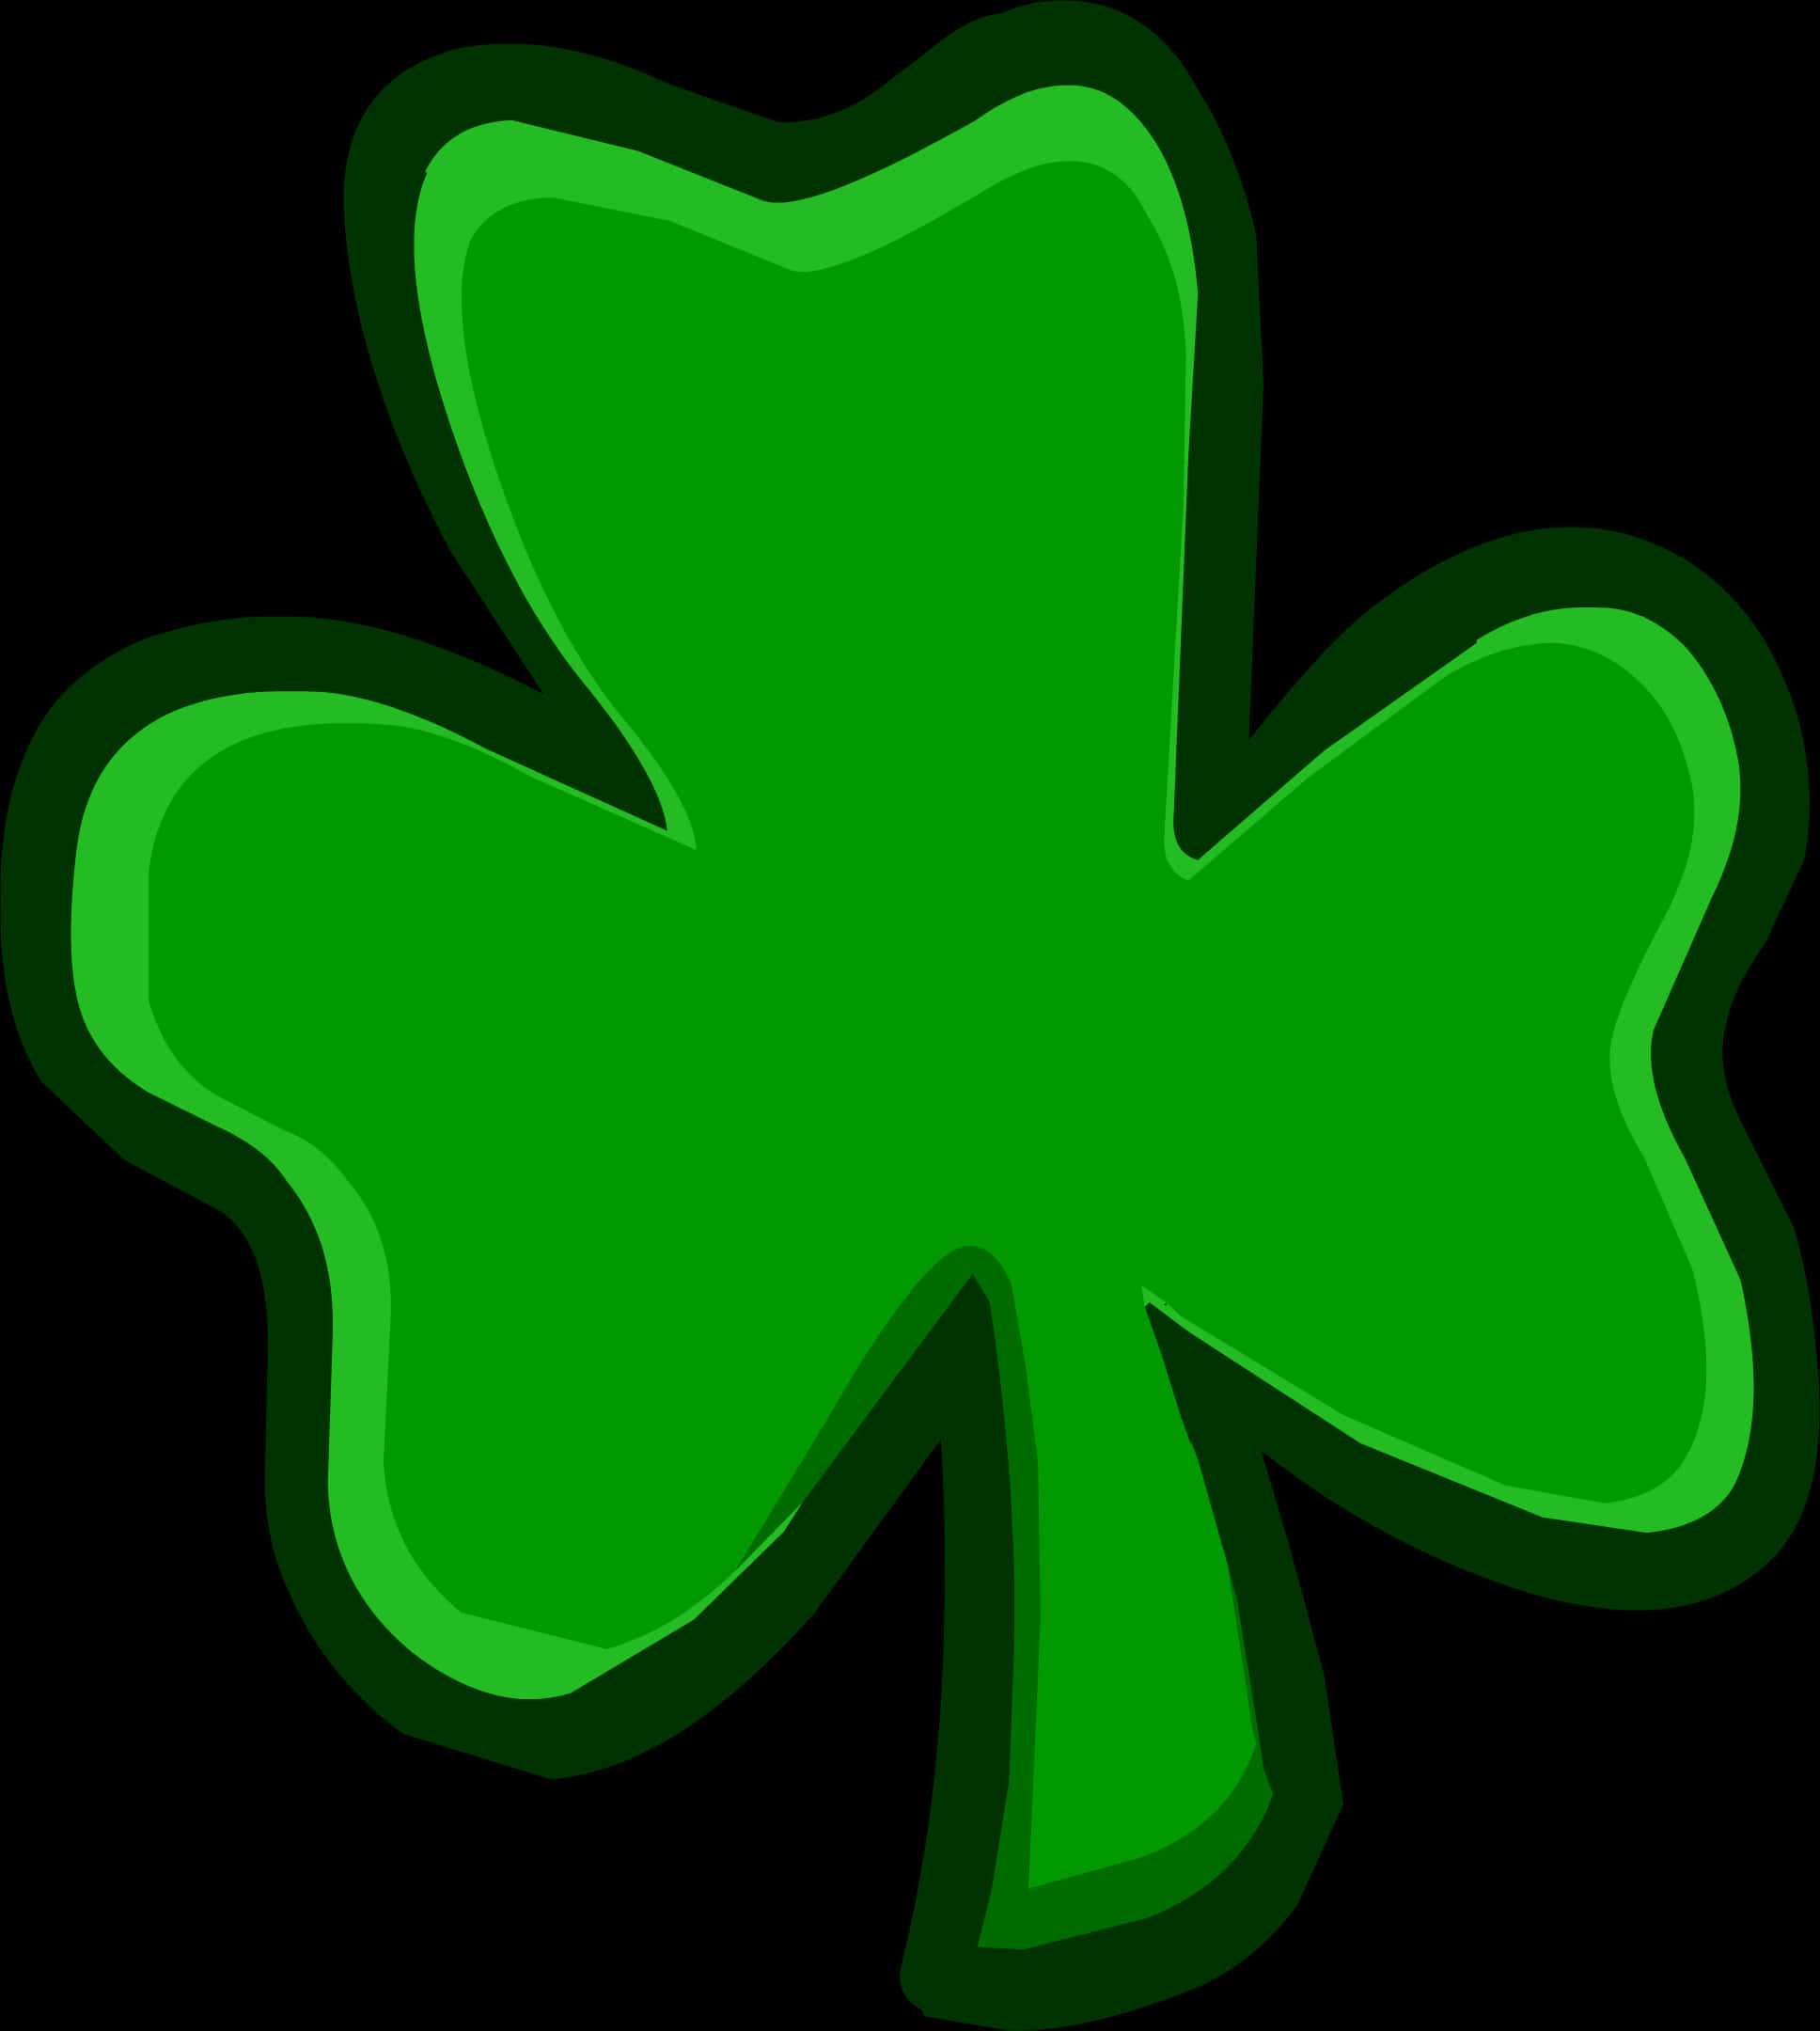 A Green Clover With Black Background